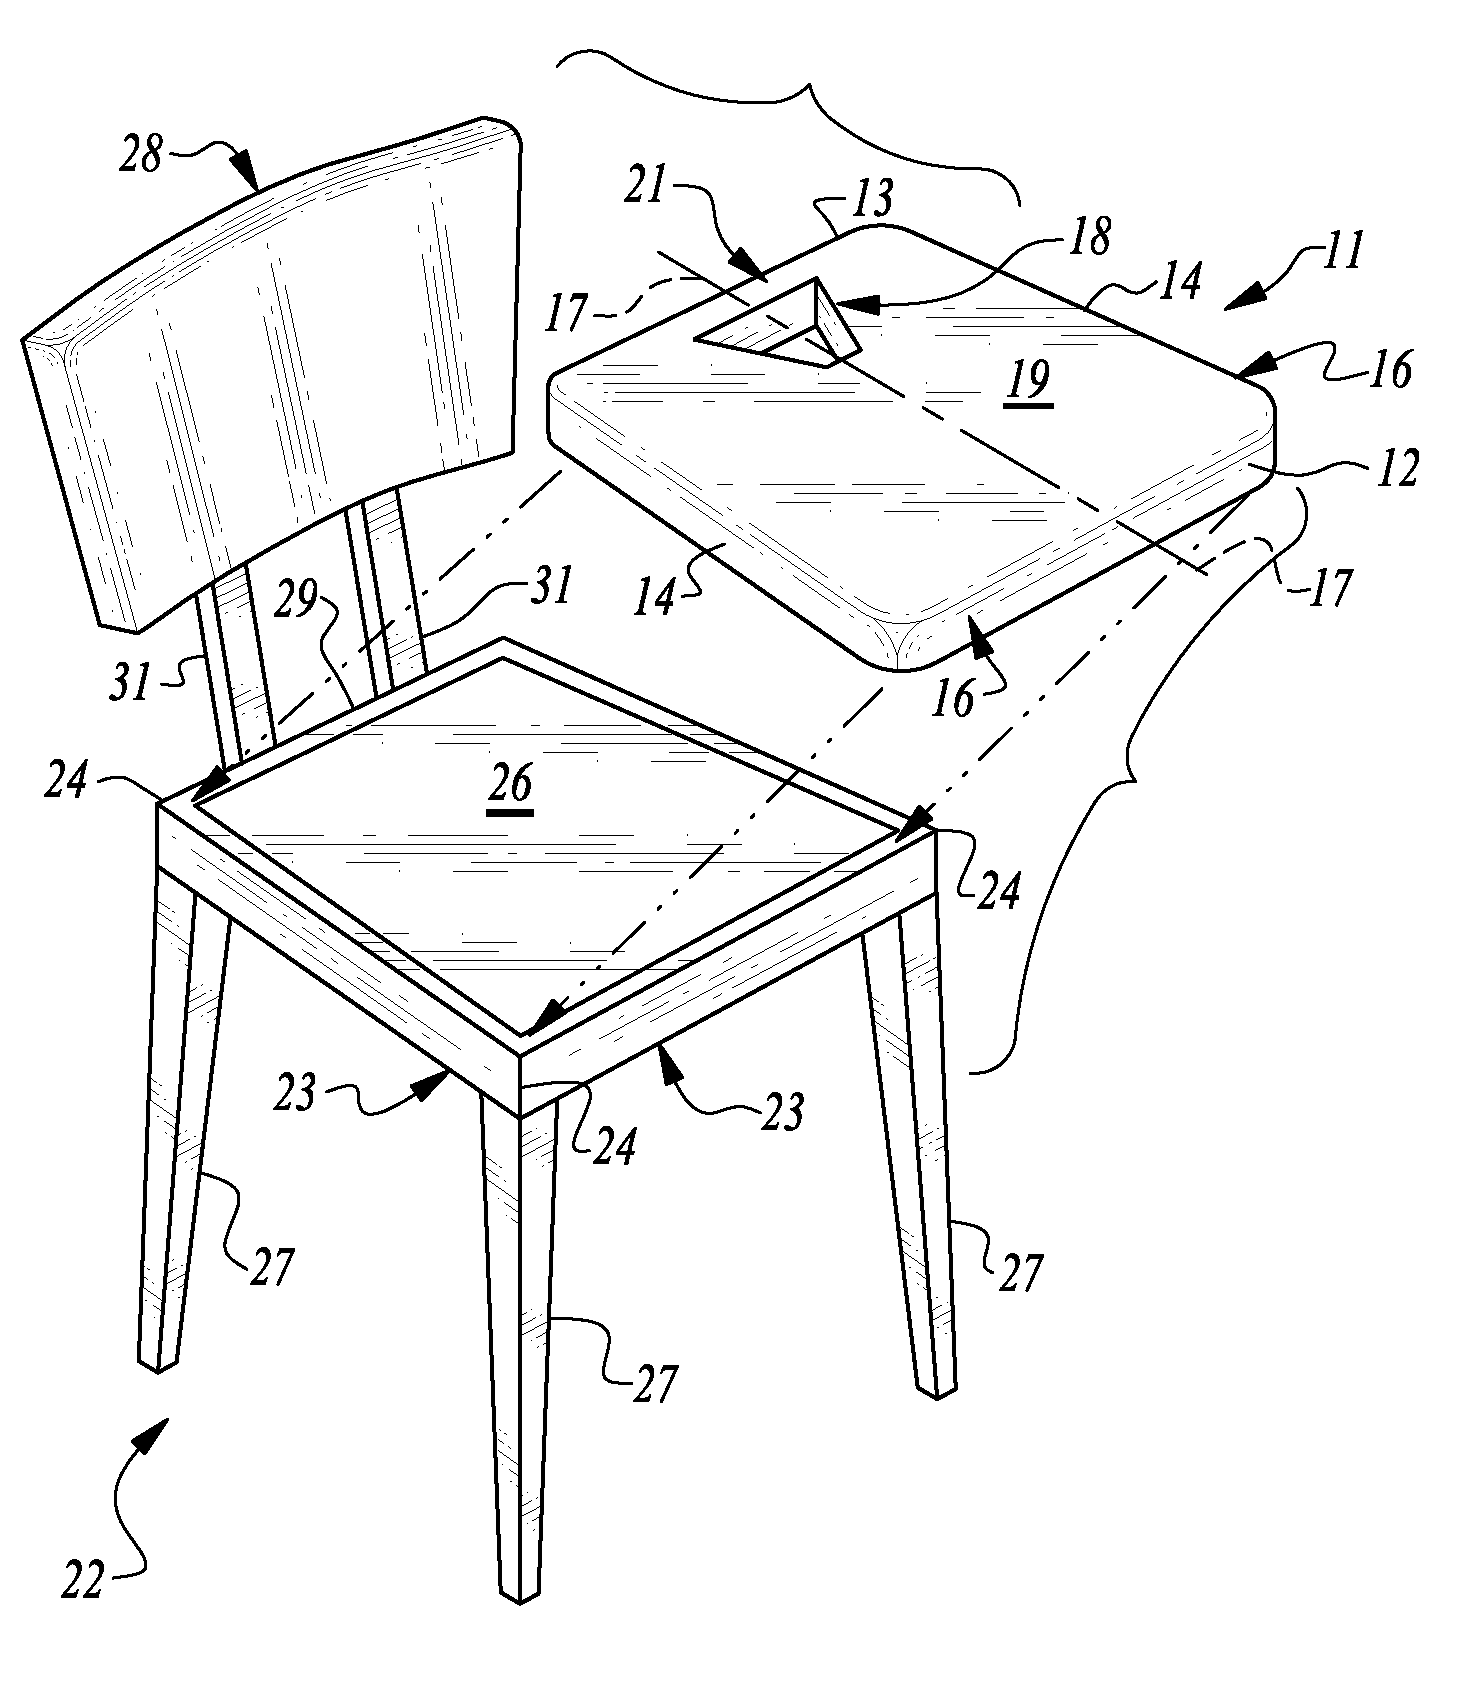 Seat Cushion With Recessed Region To Provide Spinal Decompression